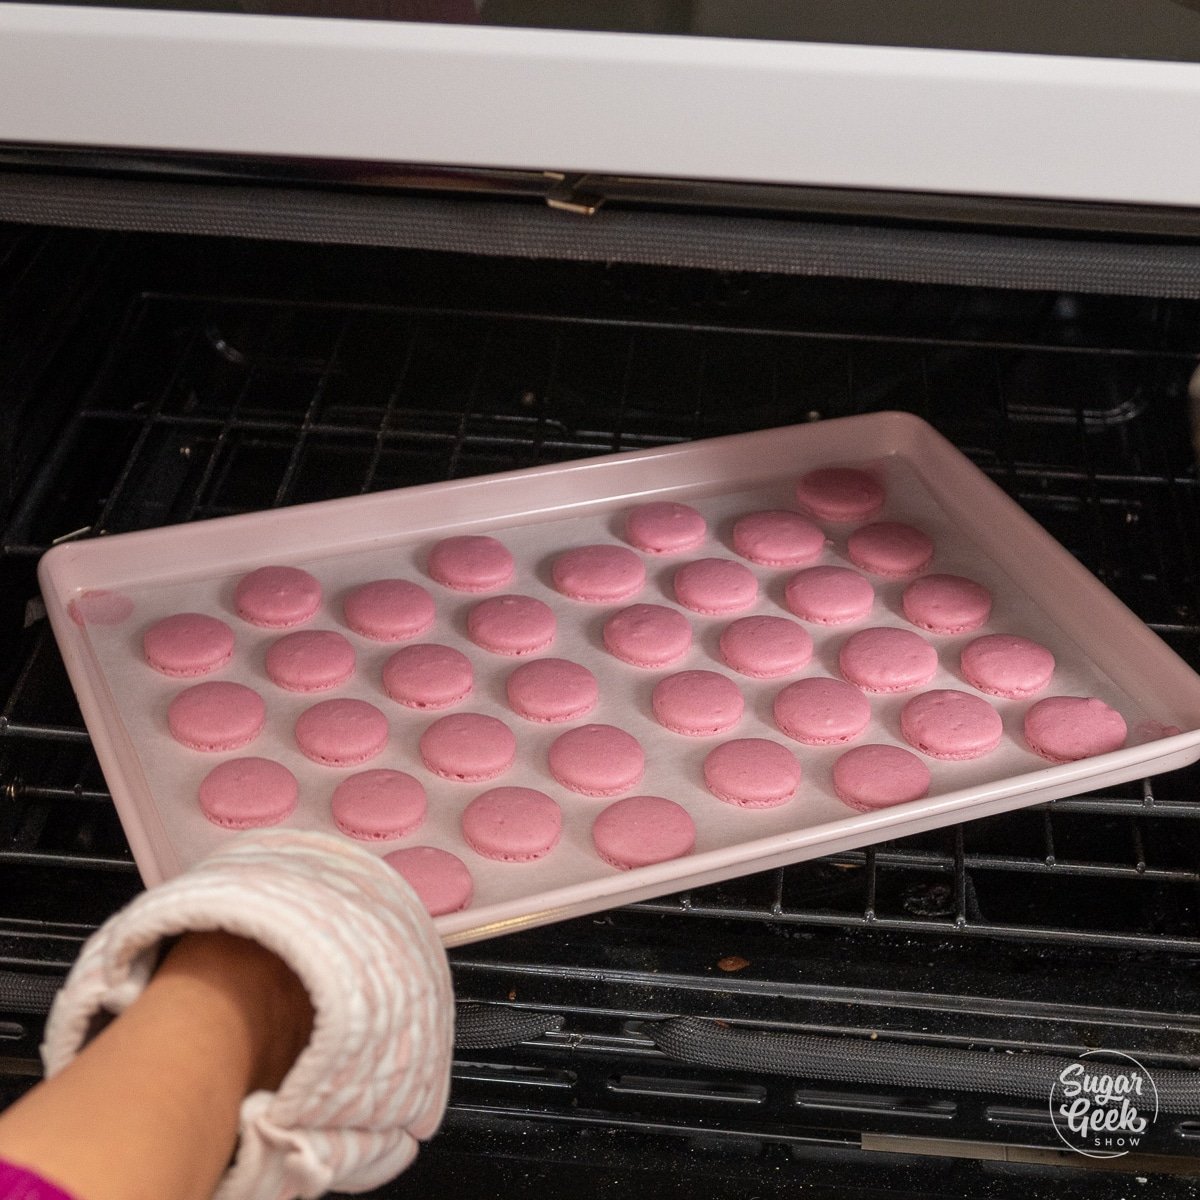 hand in a an oven mitt rotating a baking tray in the oven